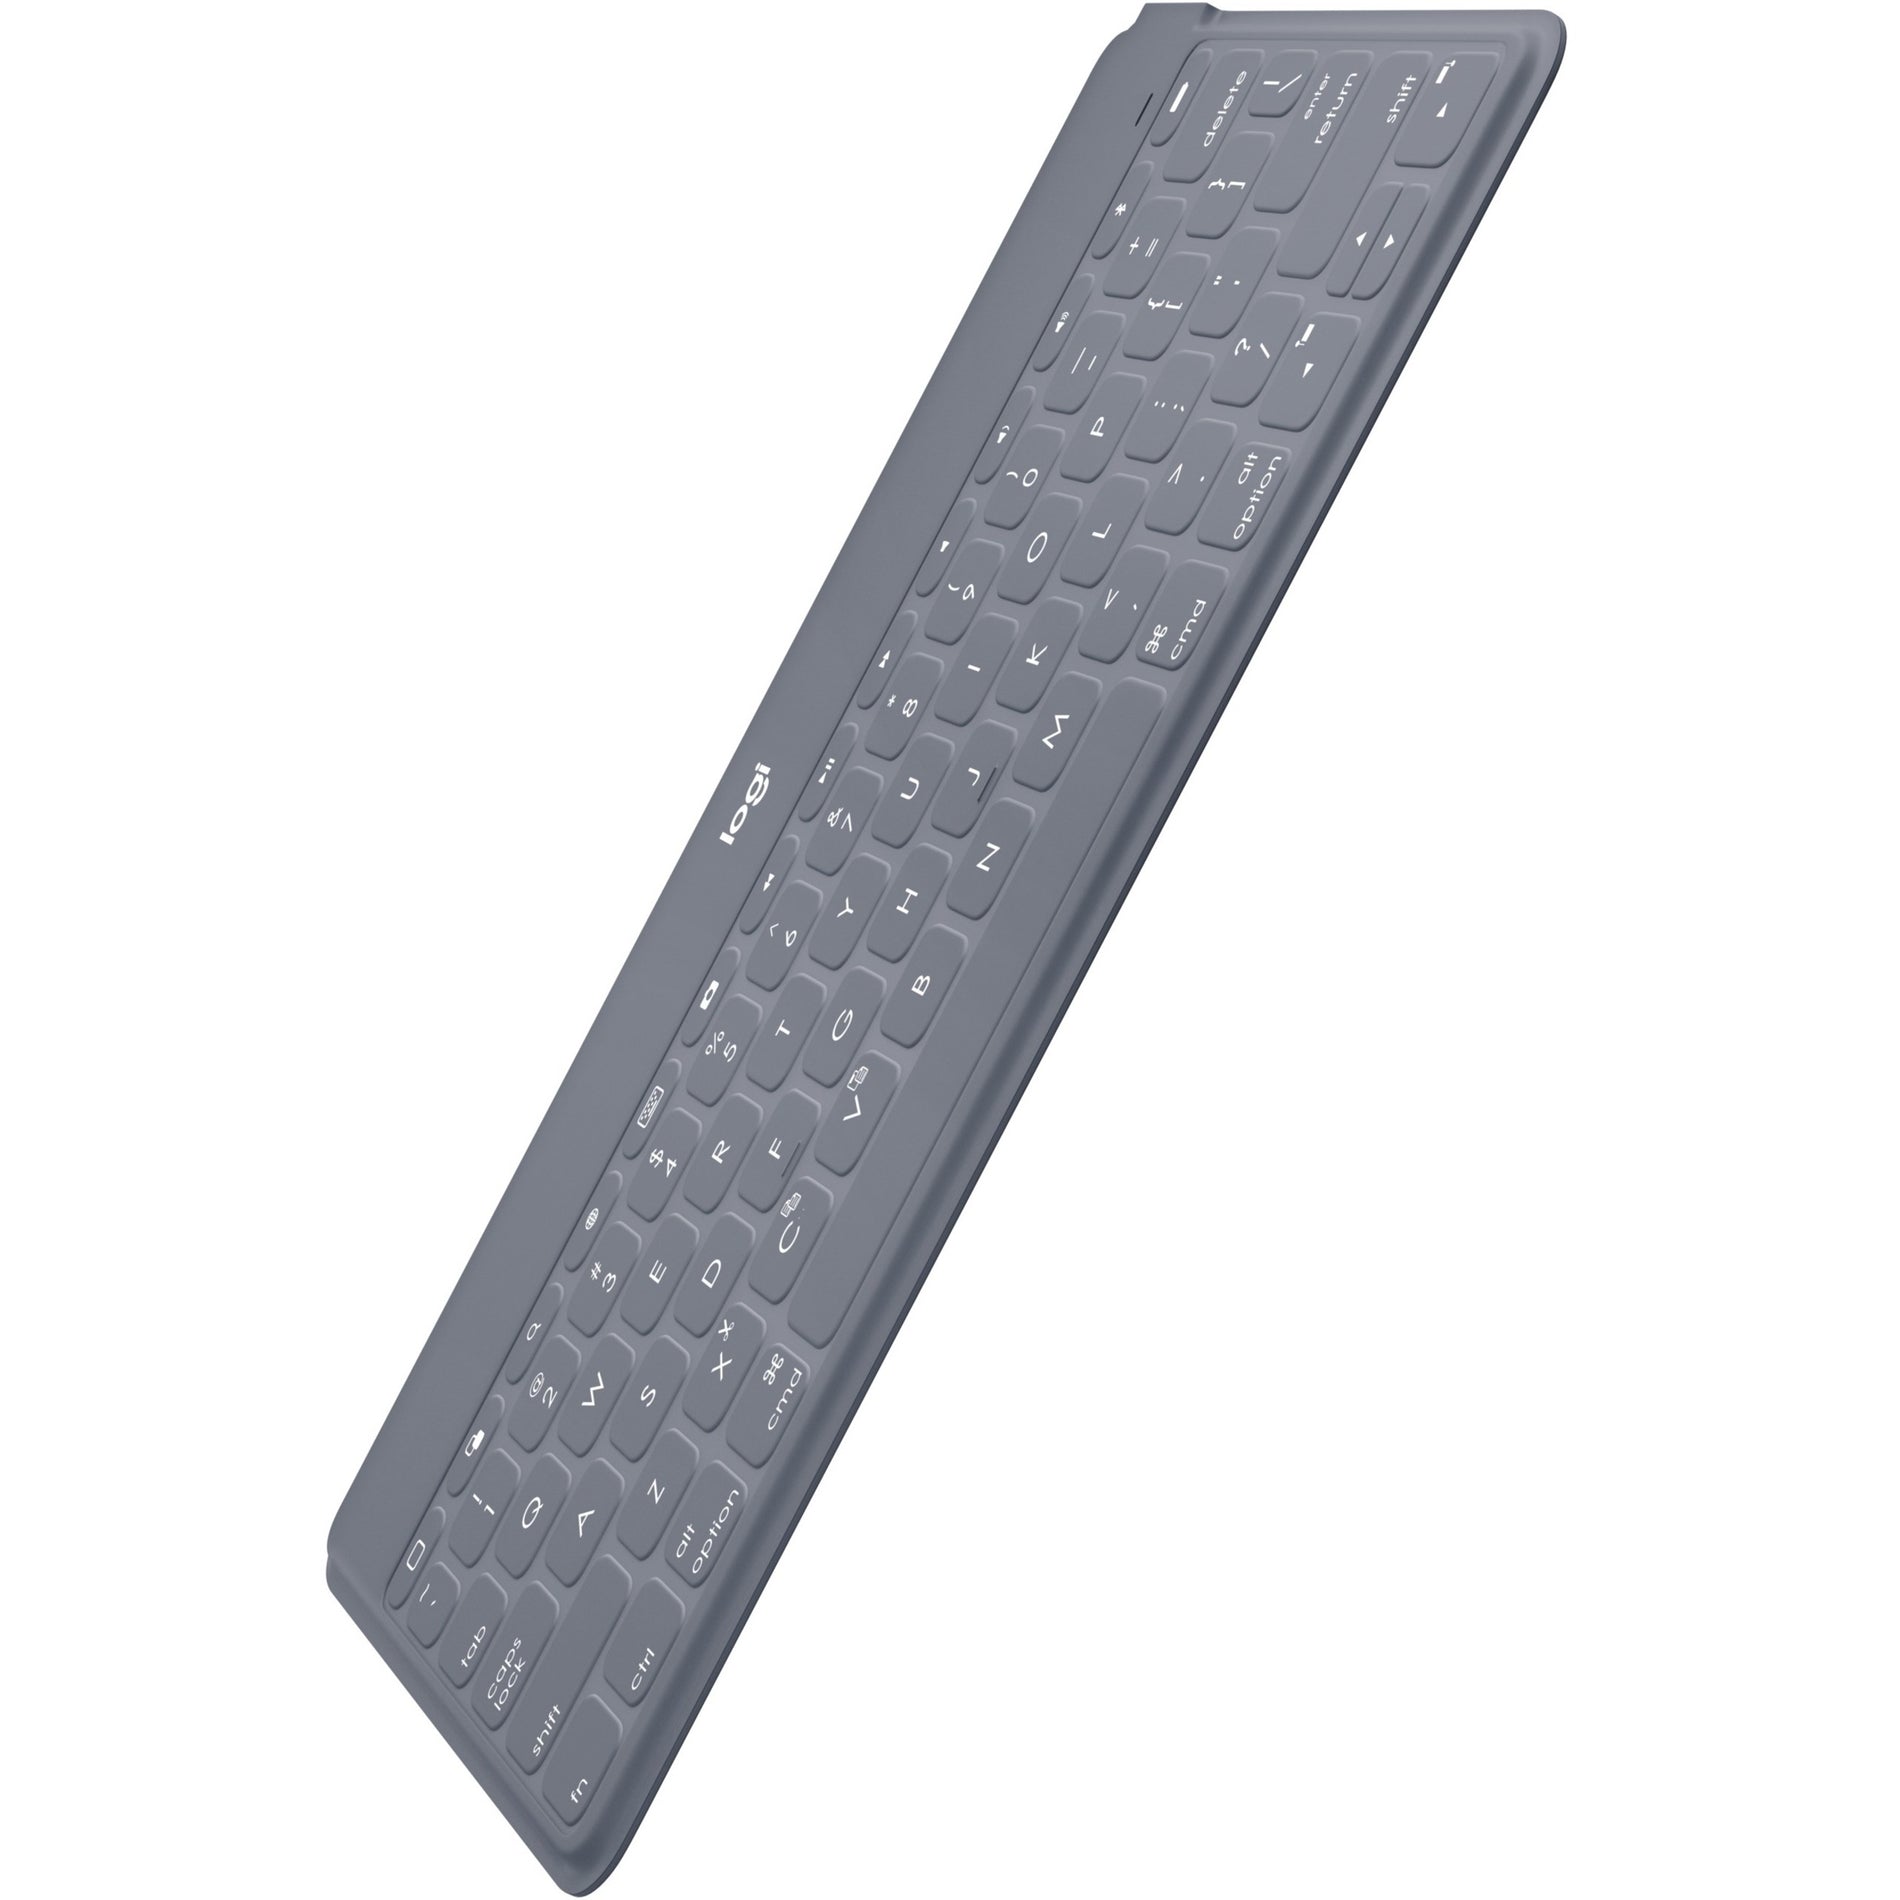 Logitech 920-008918 Keys-To-Go Keyboard, Slim and Portable Bluetooth Wireless Keyboard for iPad, Apple TV, and iPhone